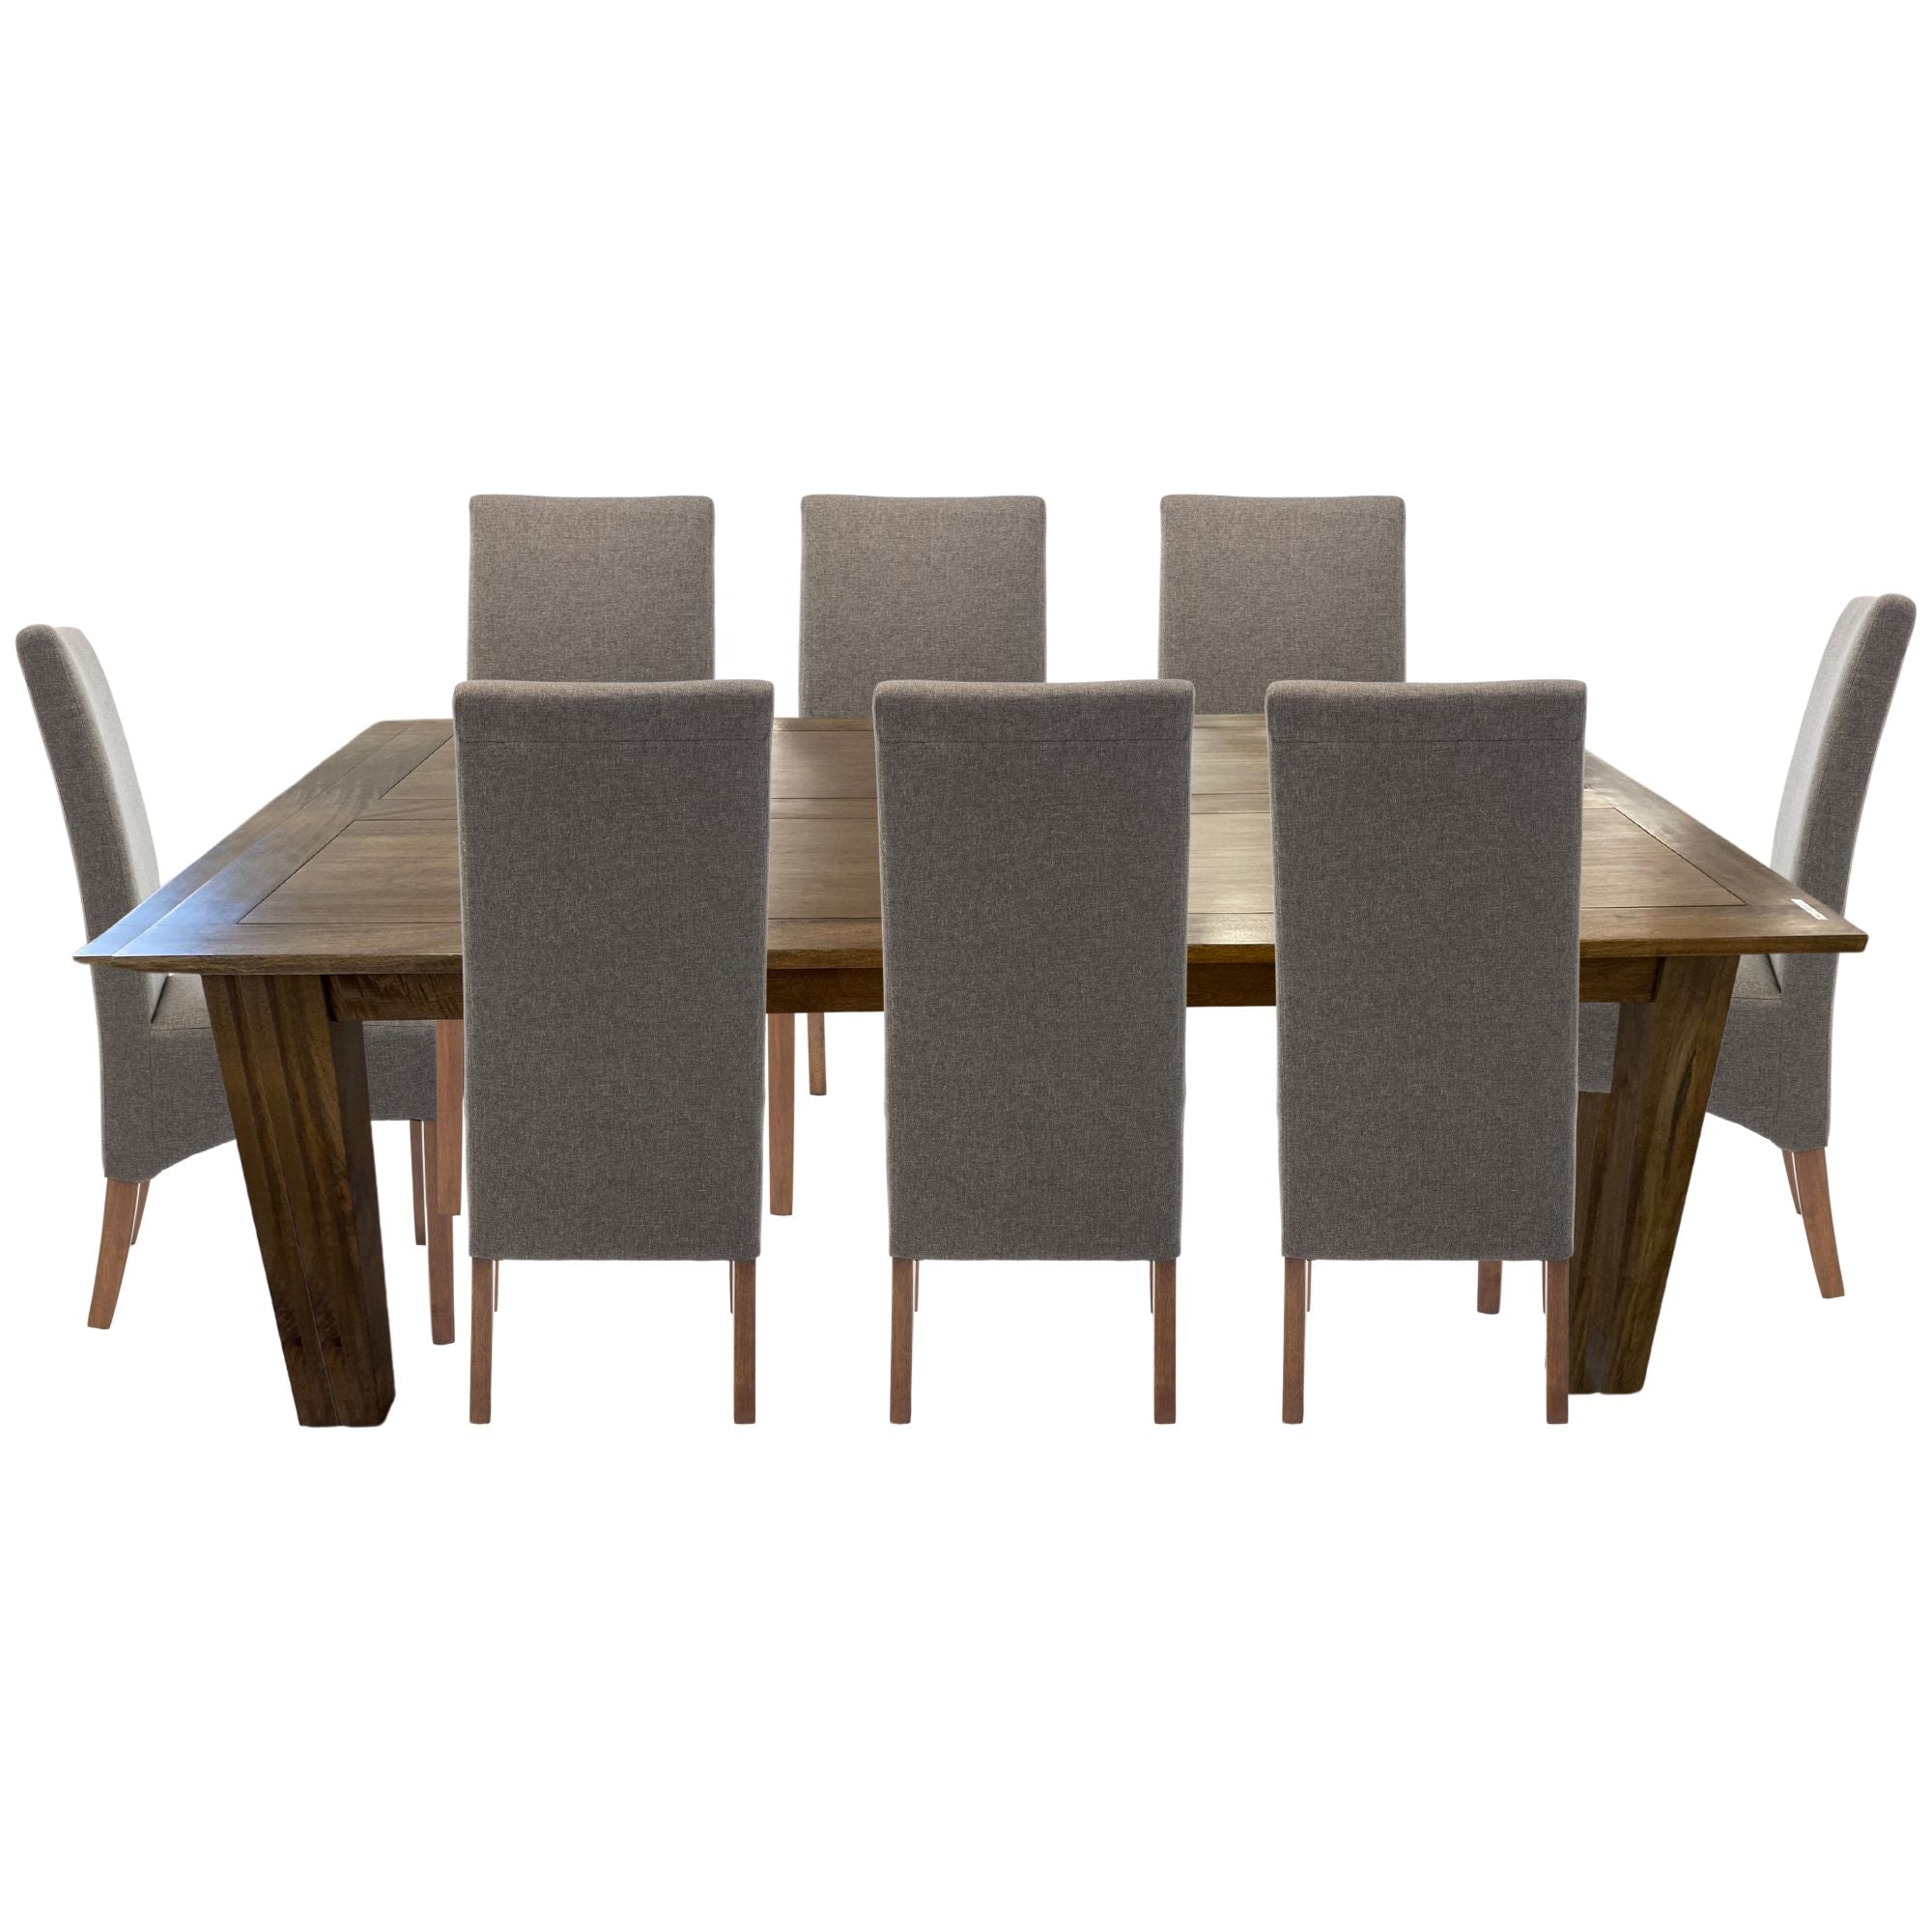 Aksa Fabric Upholstered Dining Chair Set of 8 Solid Pine Wood Furniture - Grey Deals499